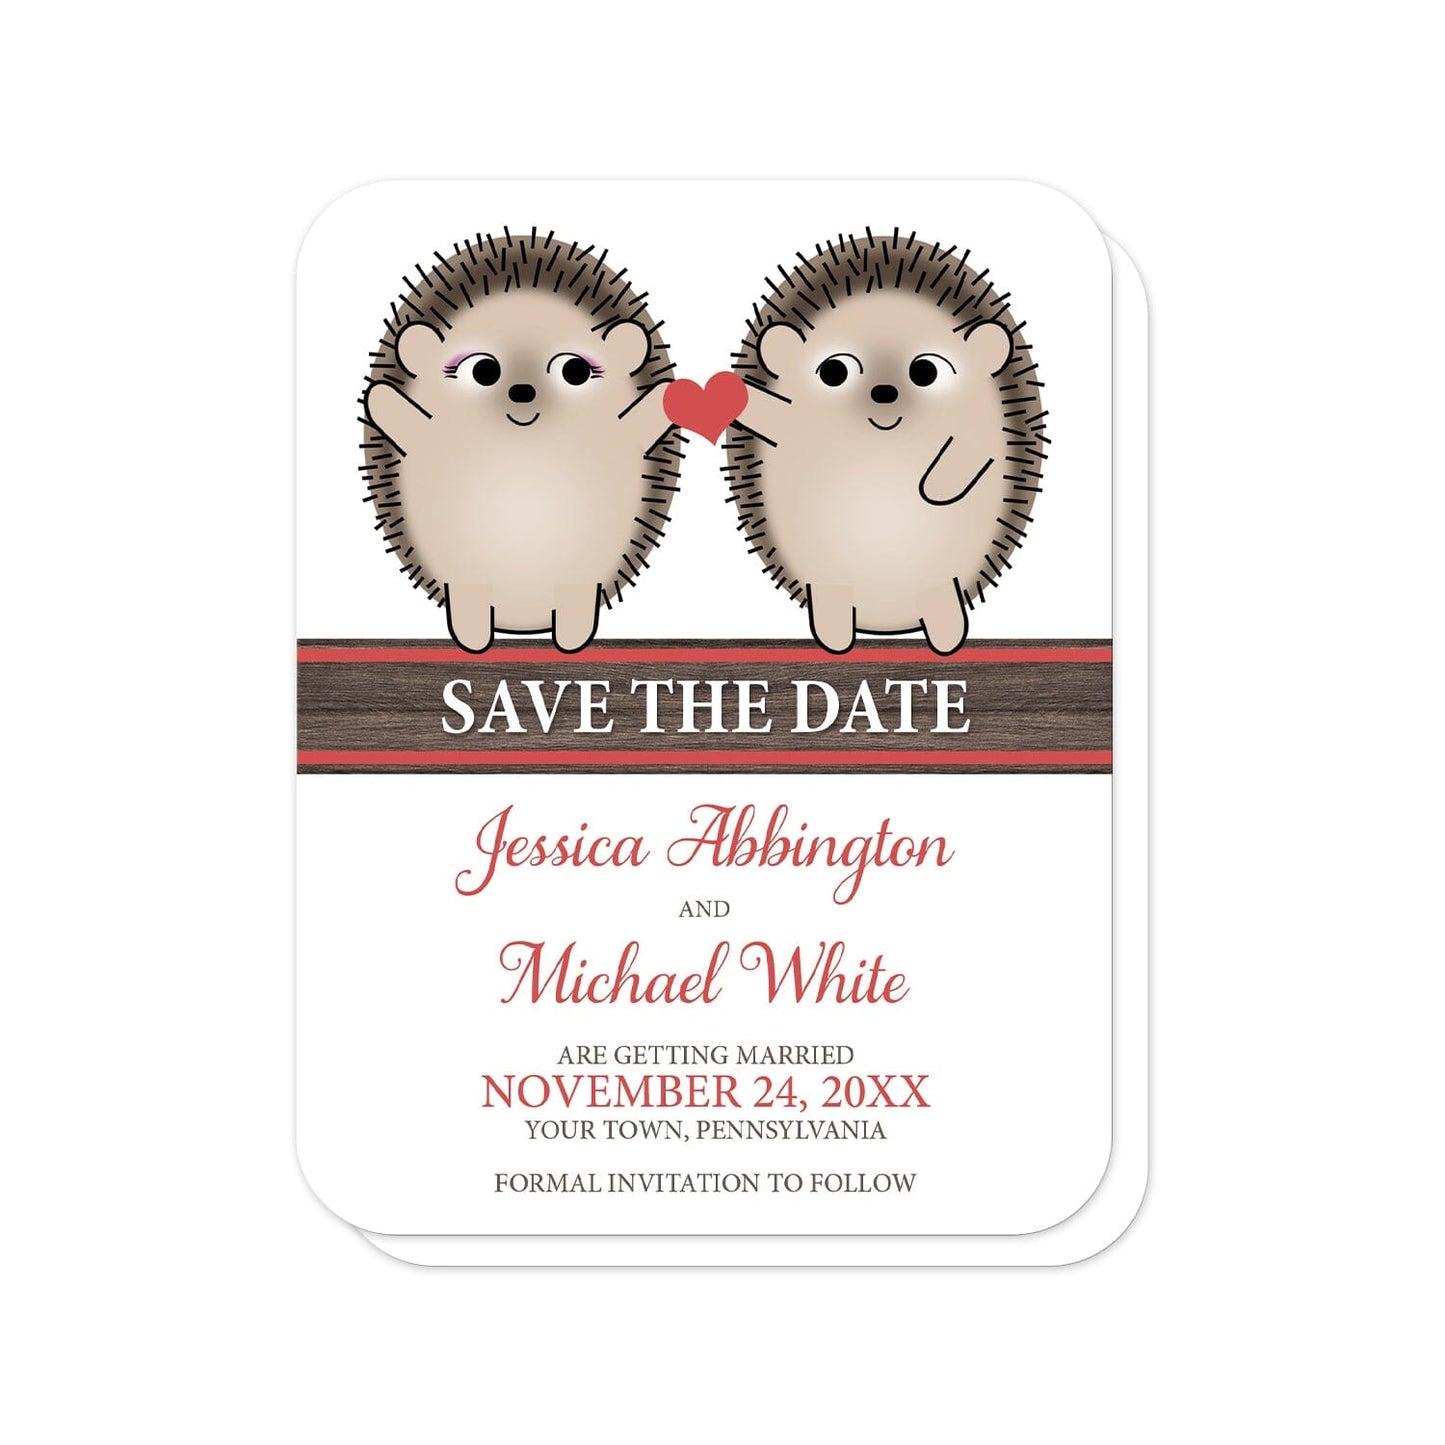 Cute Hedgehogs Holding Red Heart Save the Date Cards (with rounded corners) at Artistically Invited. Cute hedgehogs holding red heart save the date cards with two adorable brown hedgehogs smiling at each other, holding a red heart between them as an expression of love and affection. Across the center area of these cards is 'save the date' in white over a red and brown wood grain stripe.